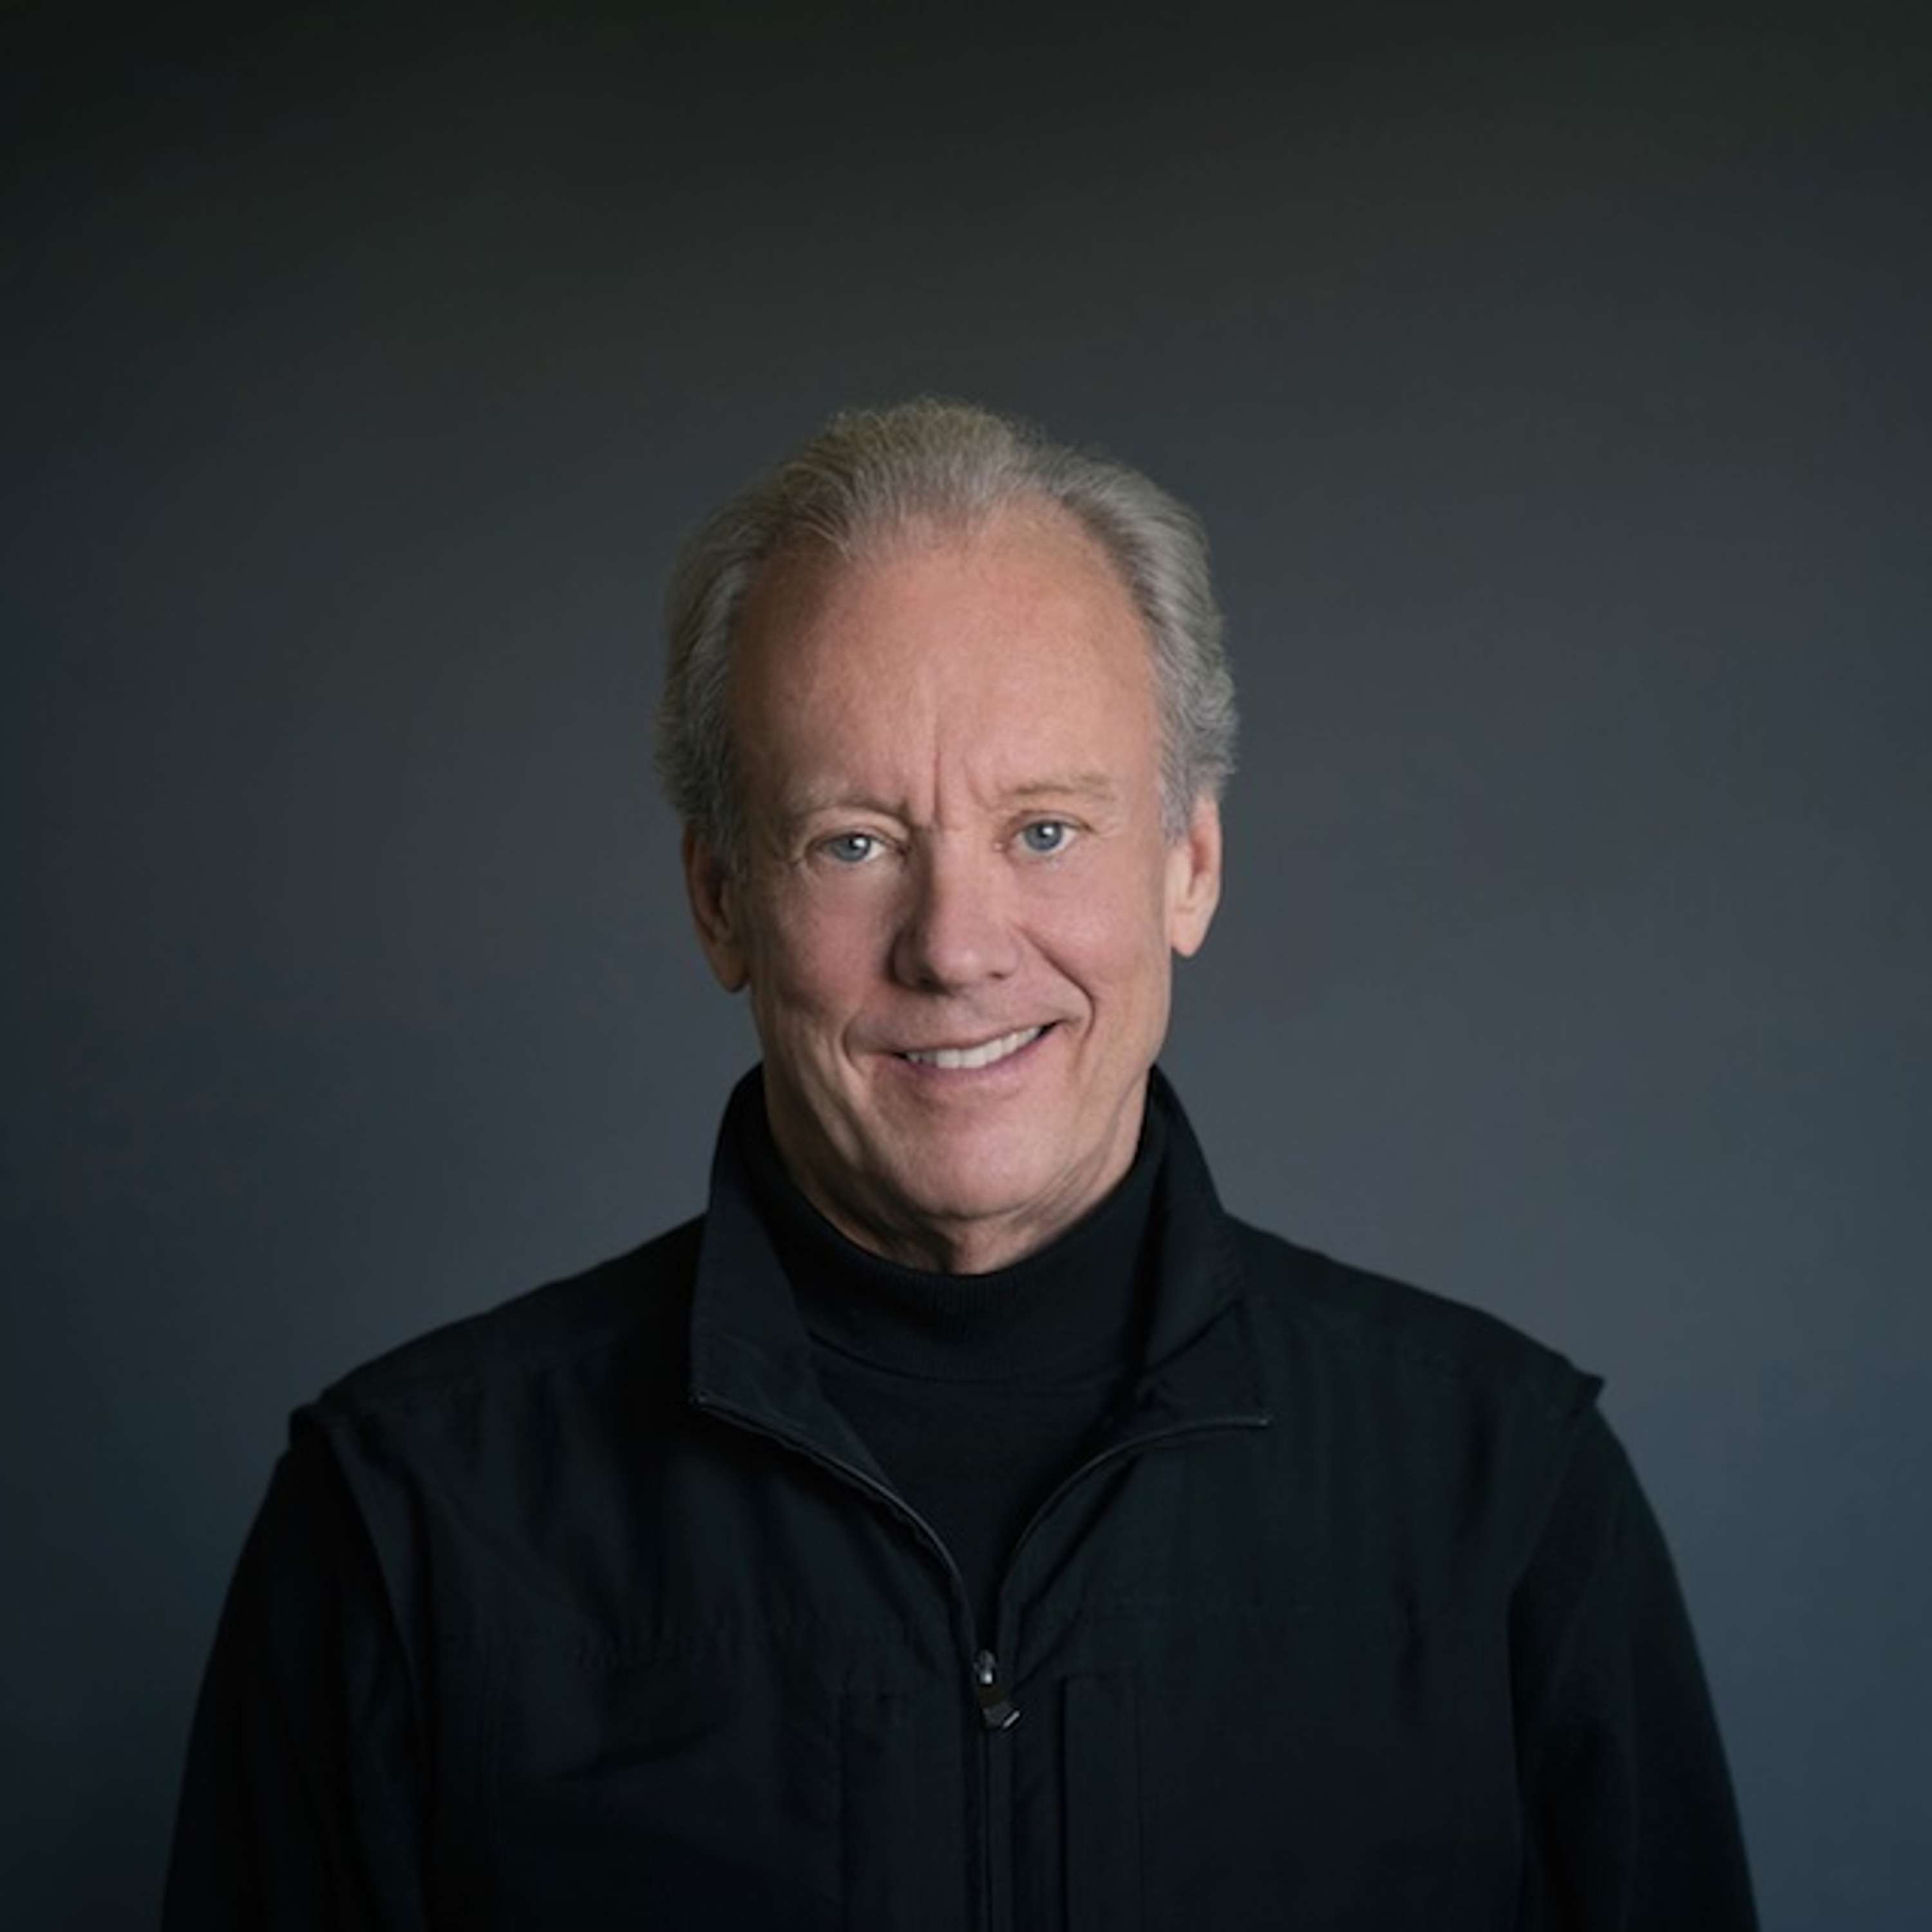 Episode 41: Interview with William McDonough on the Cradle to Cradle economy